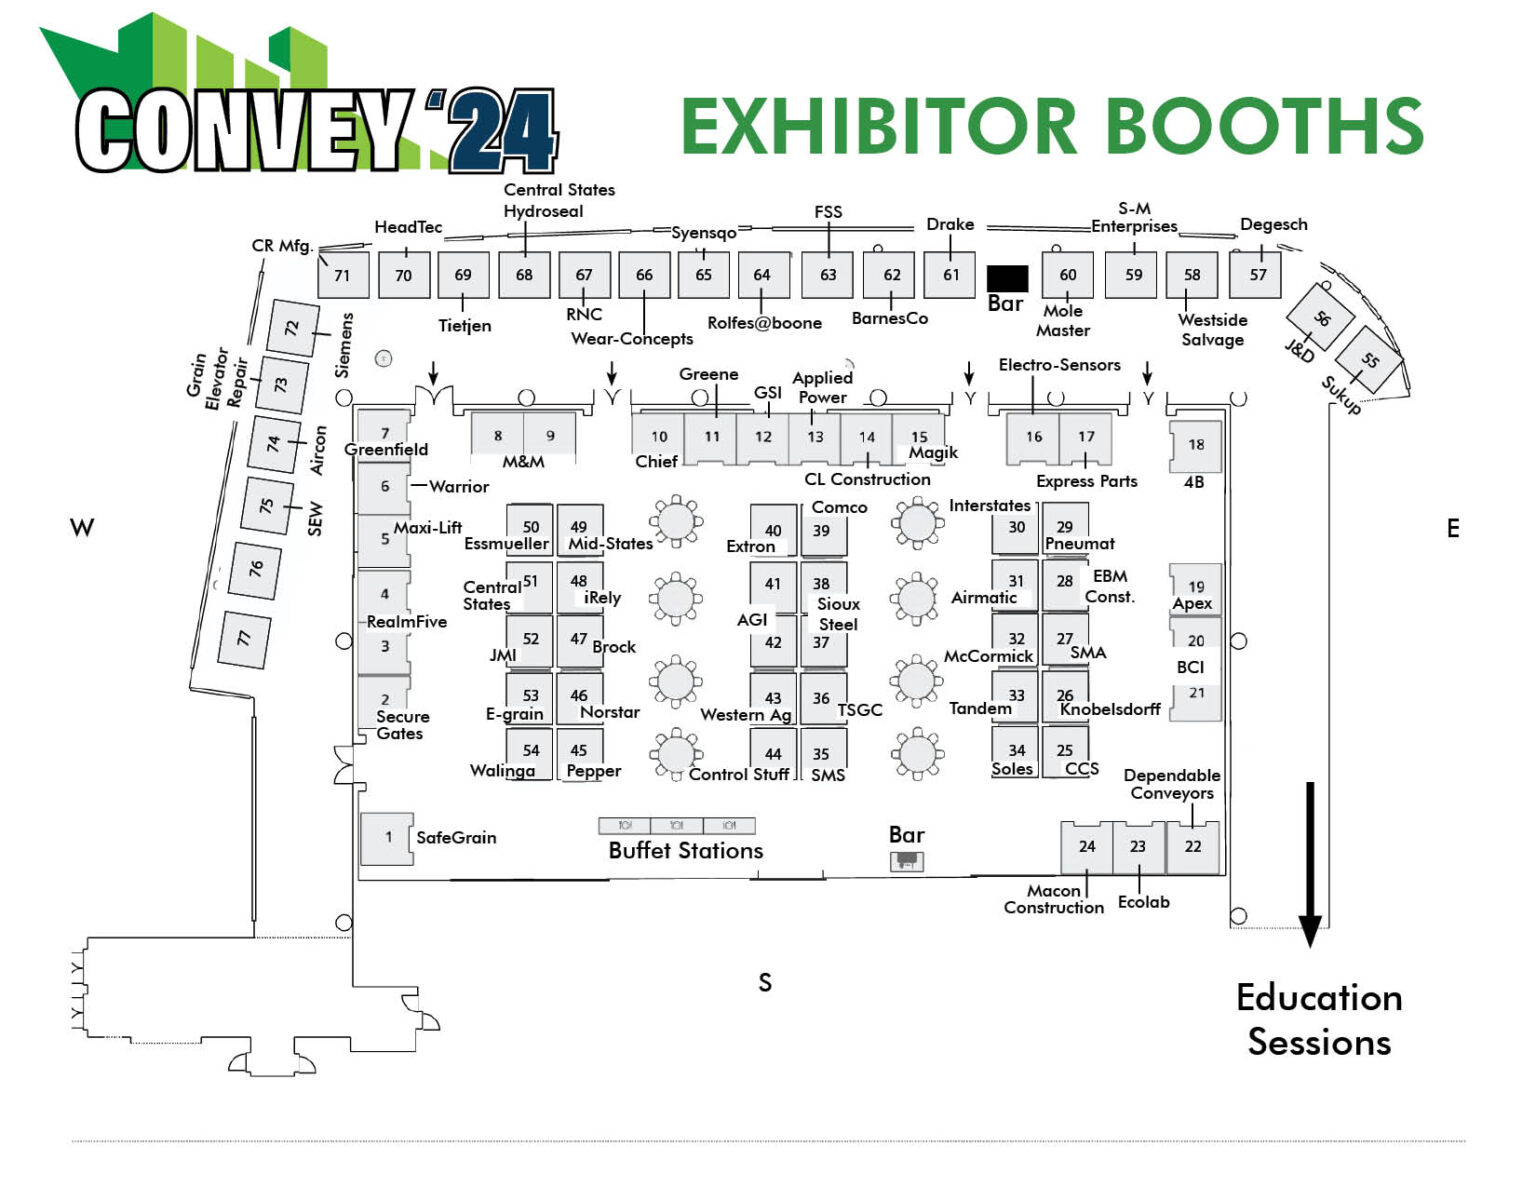 CONVEY'24 Exhibitor Booth Layout